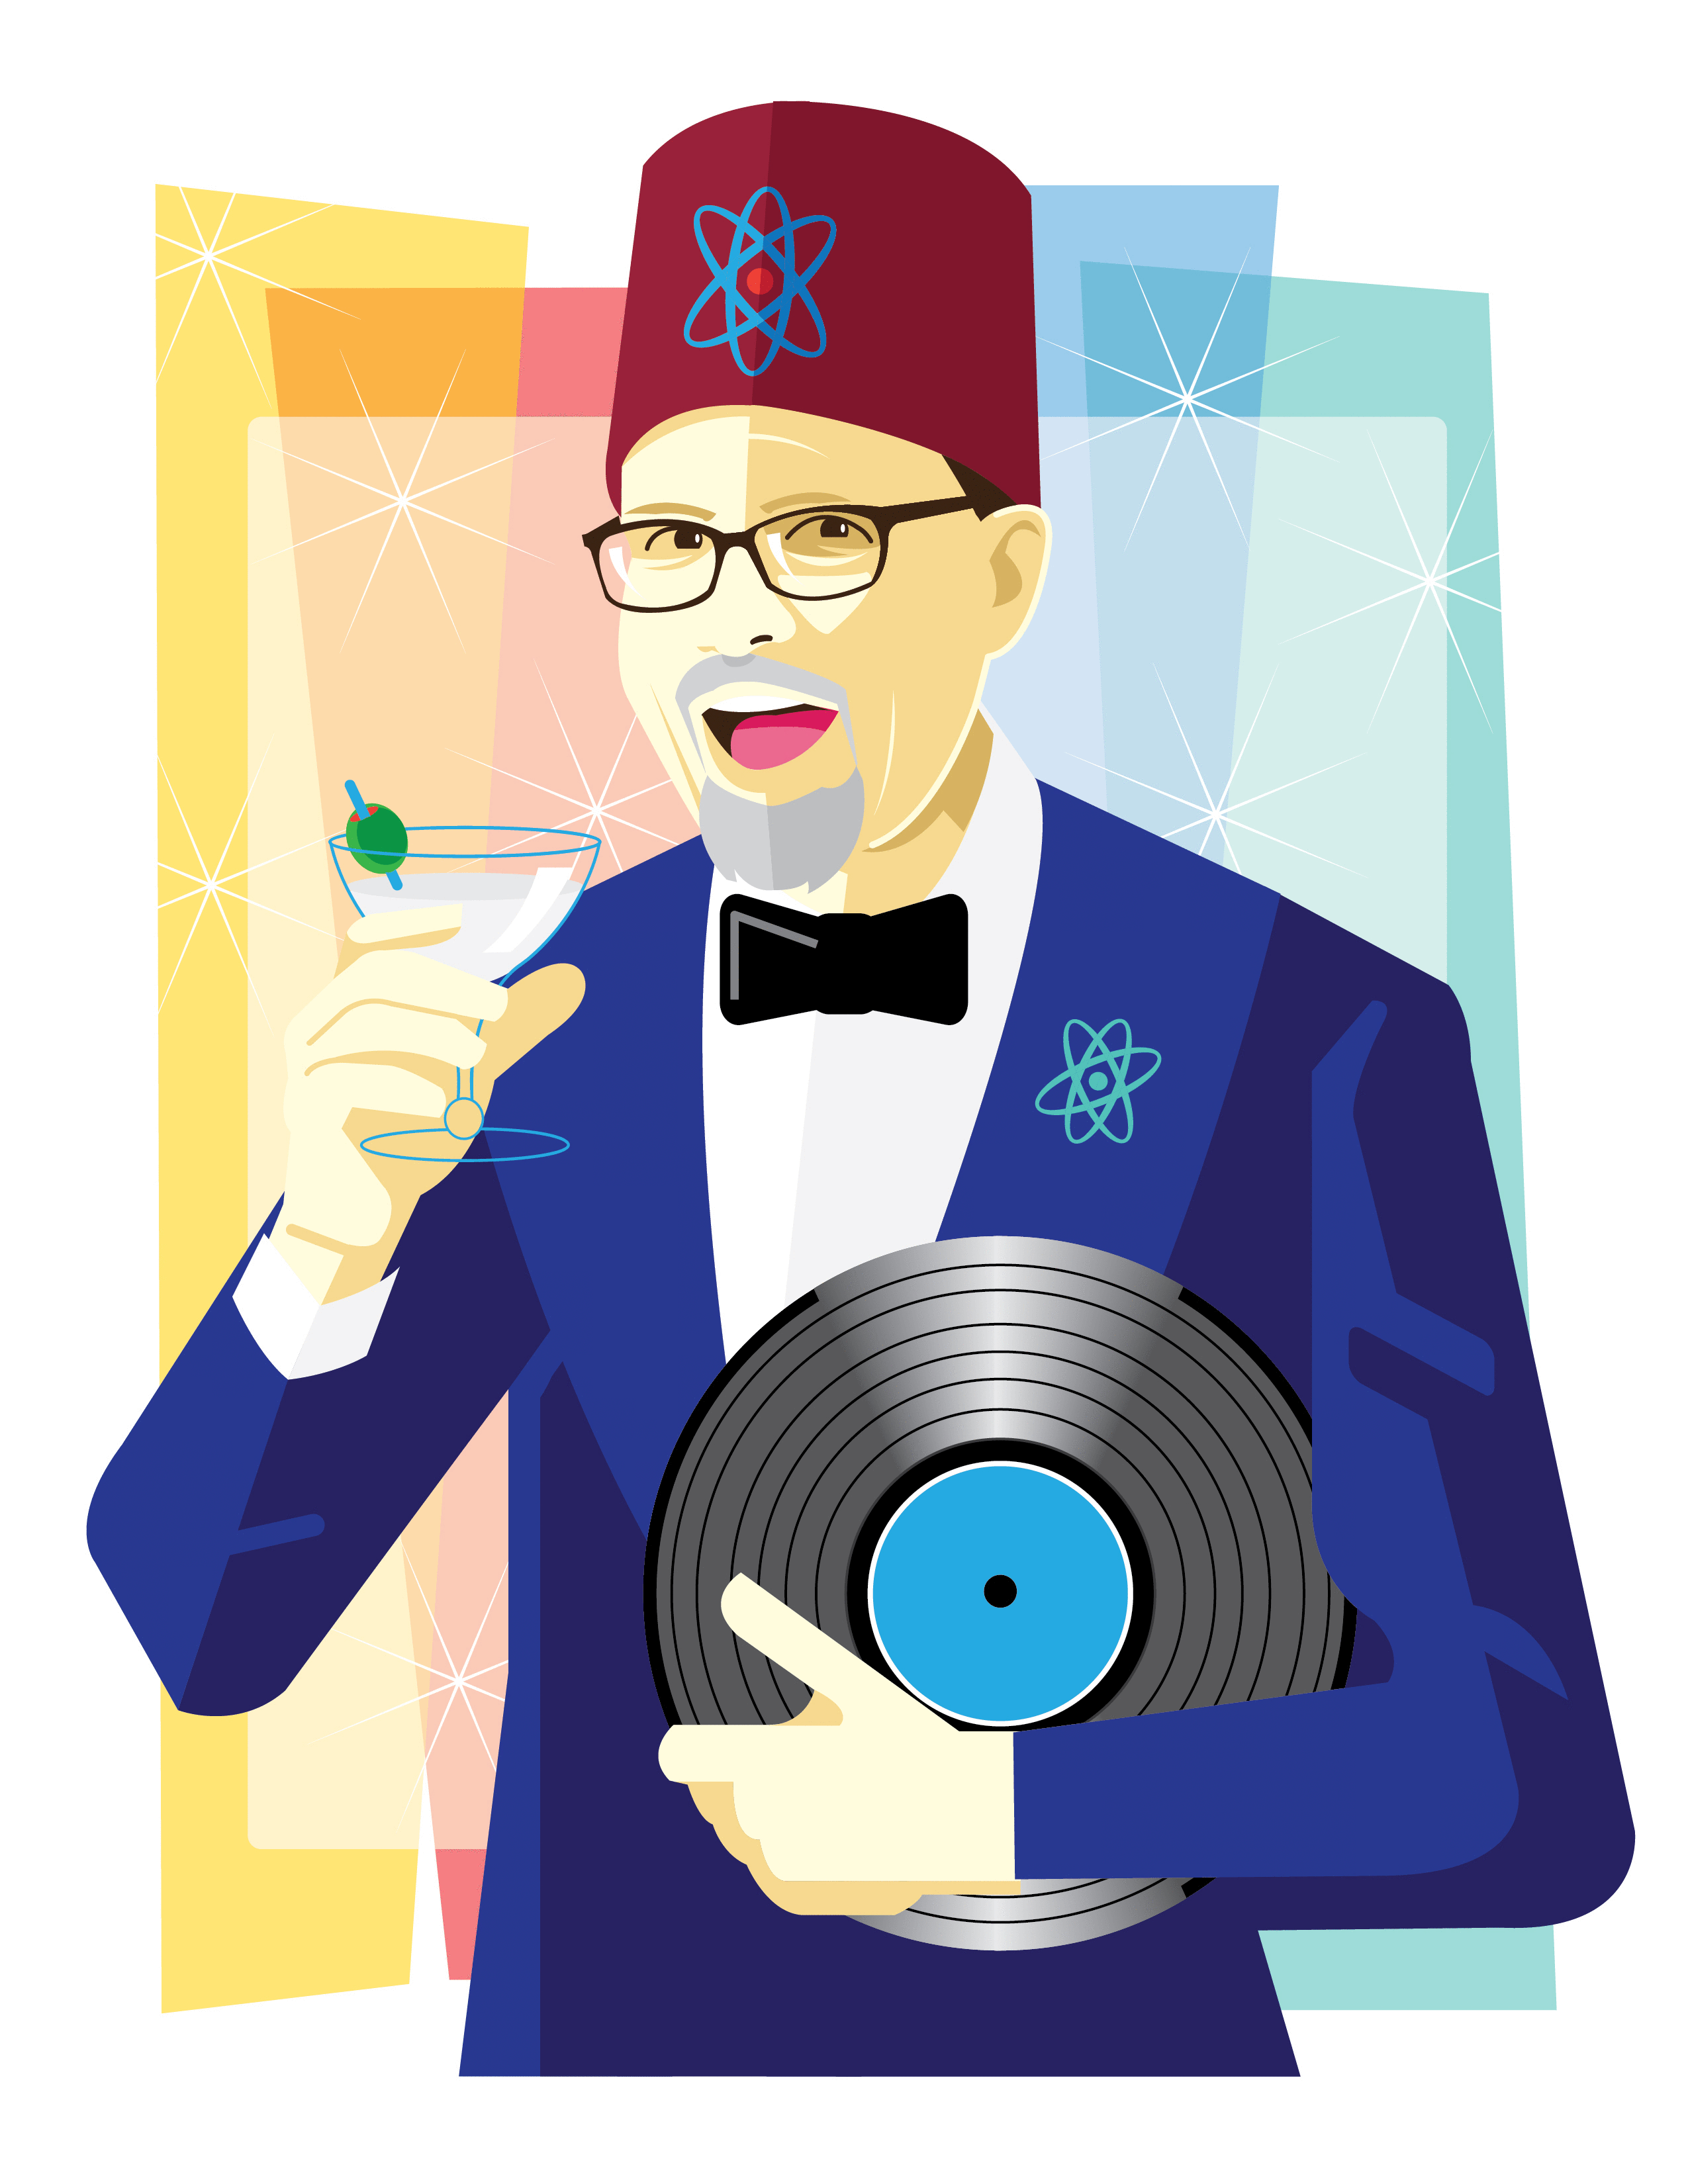 Atomic Age Cocktail Party host, Jason Croft, holds a martini in one hand and a record under the other arm, while wearing a fez and a smoking jacket in this retro-style illustration.